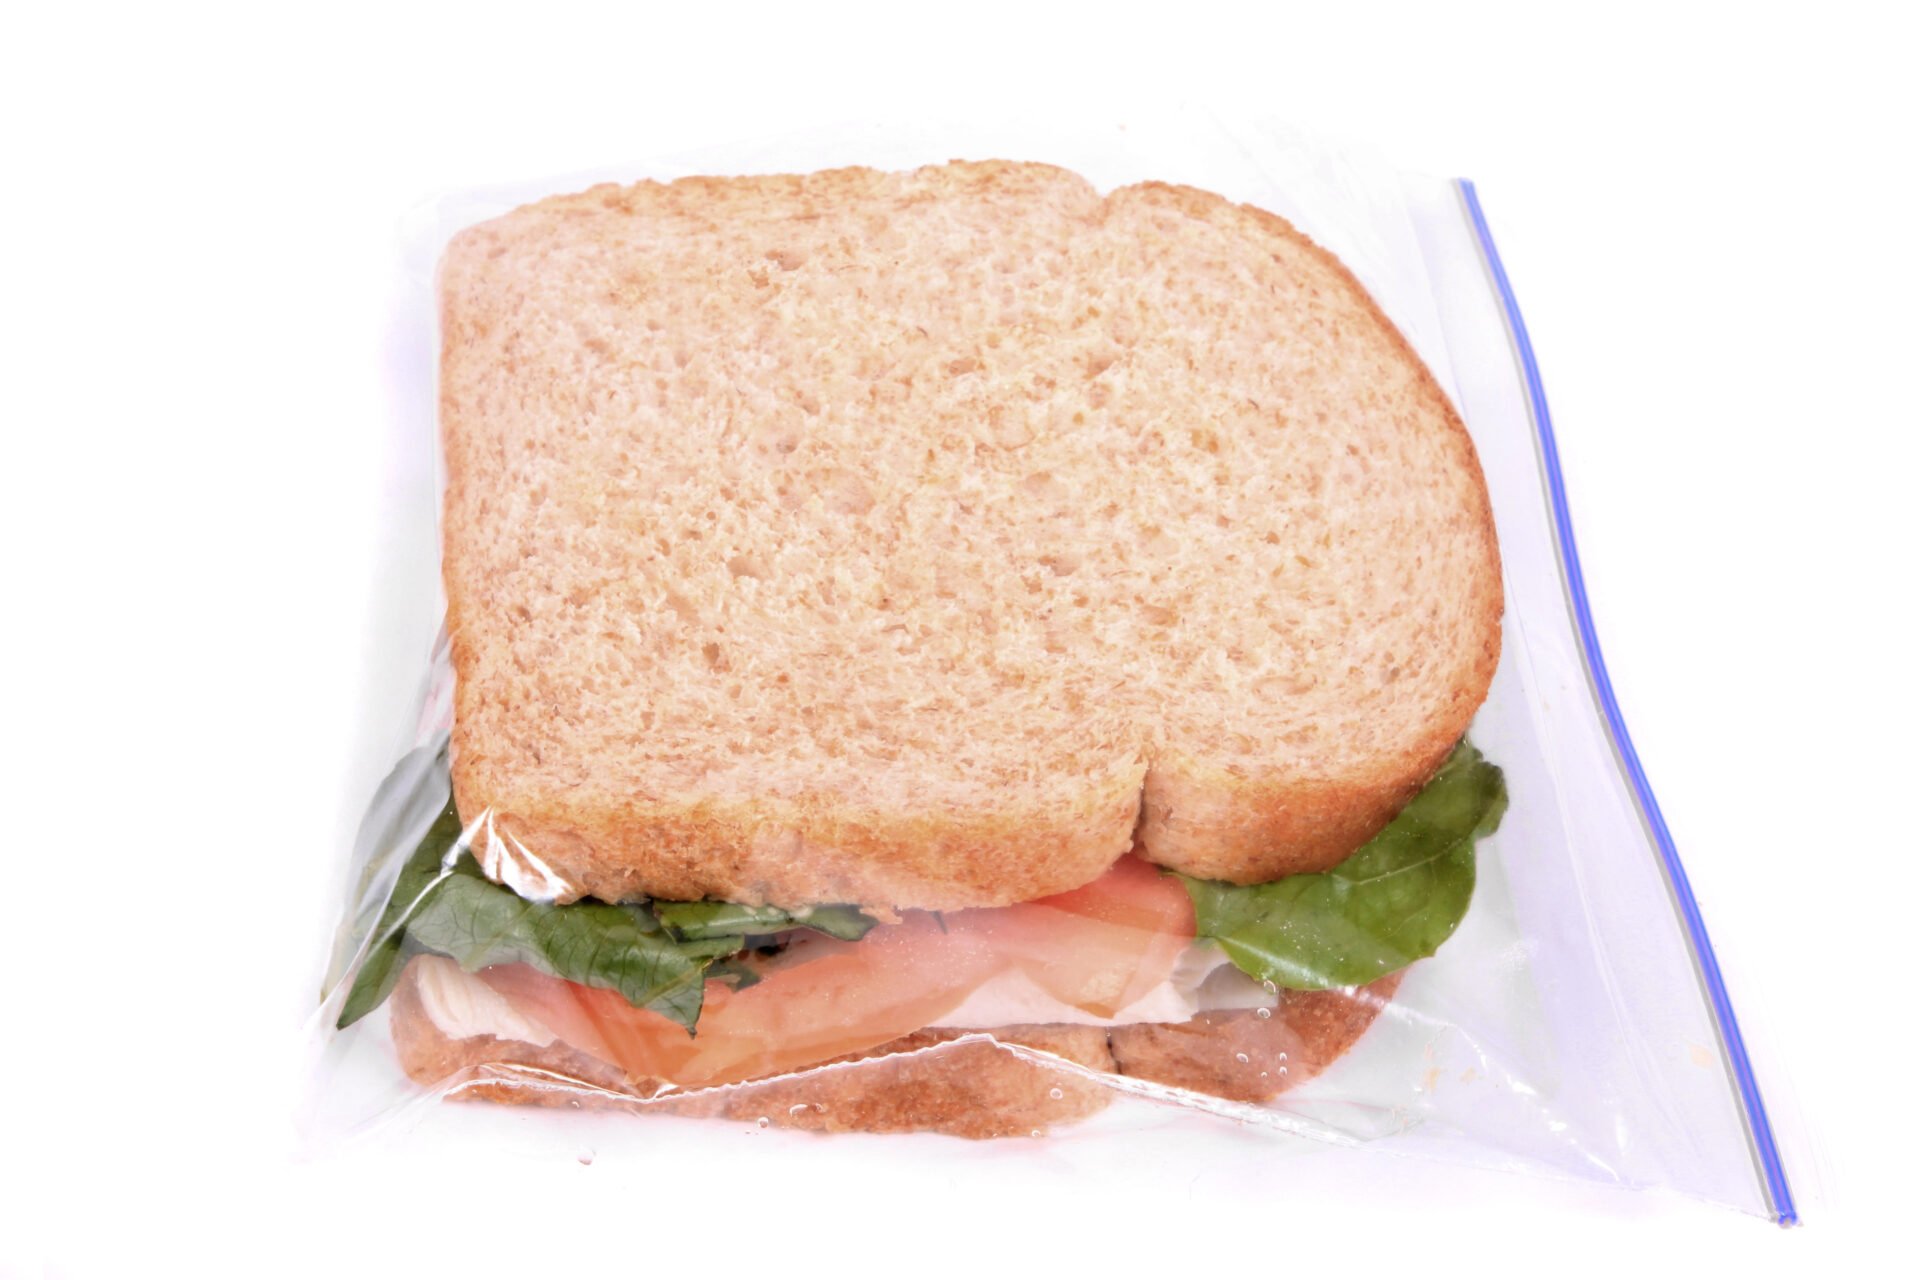 Plastic sandwich bag with indications of PFAS "forever chemicals" 